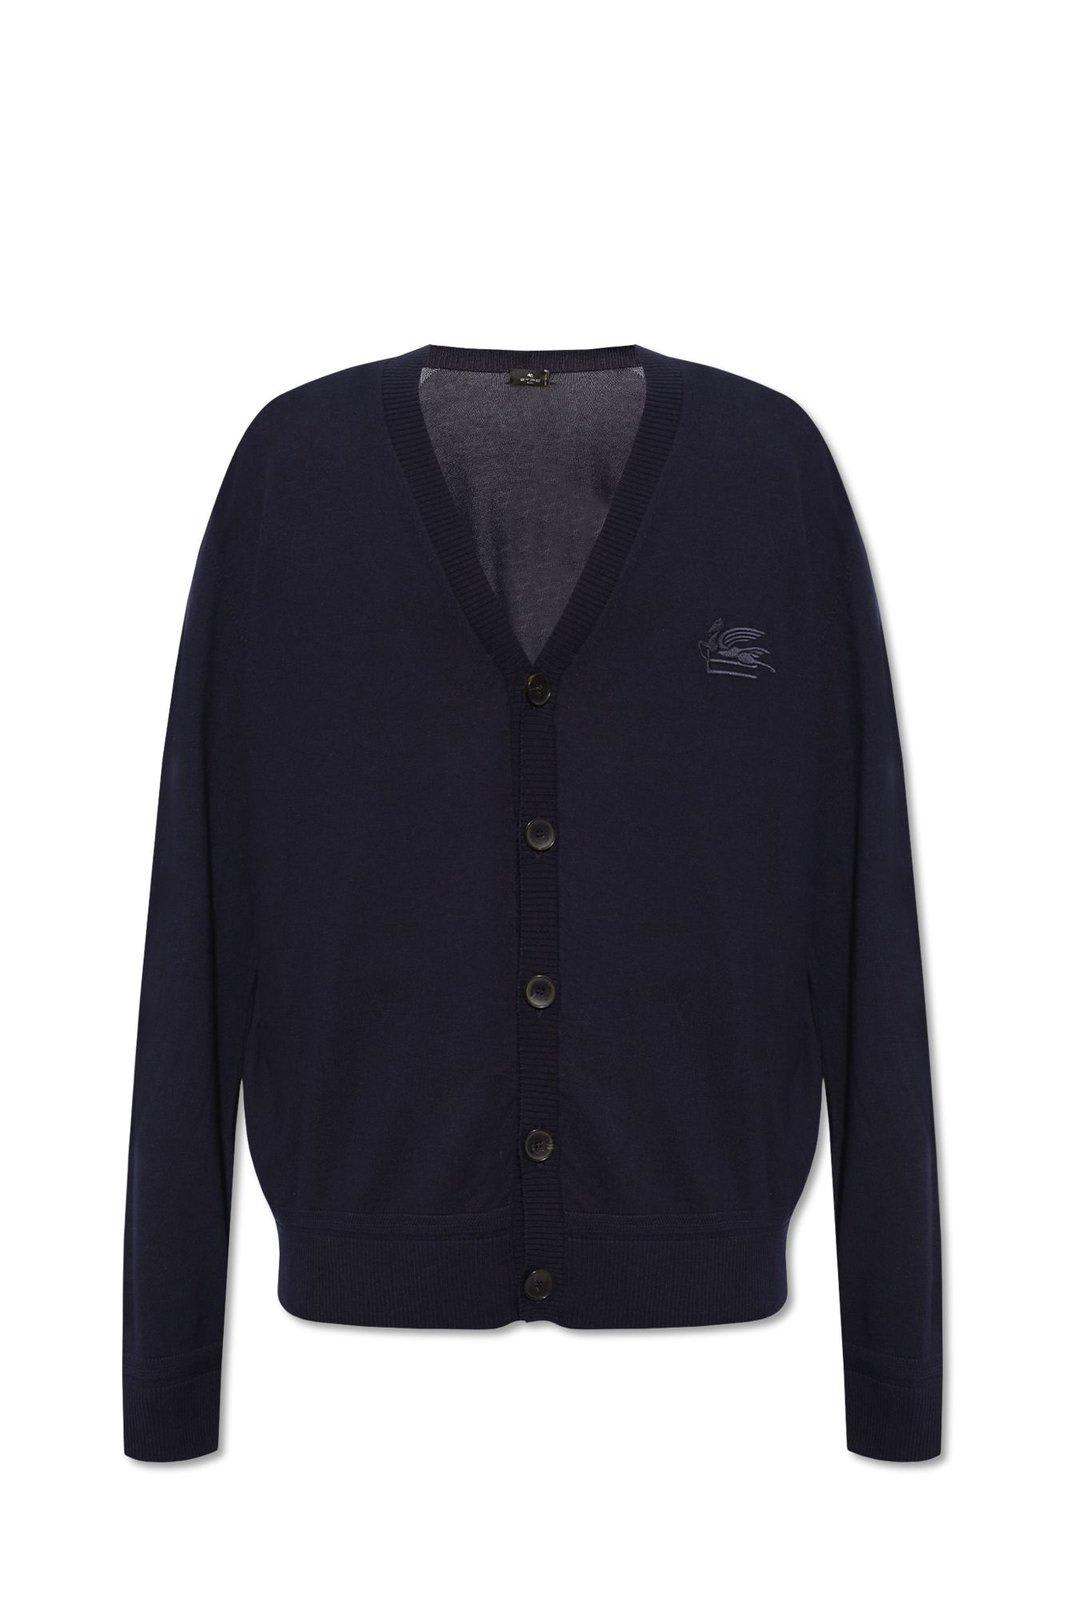 Pegaso Embroidered Knit Cardigan